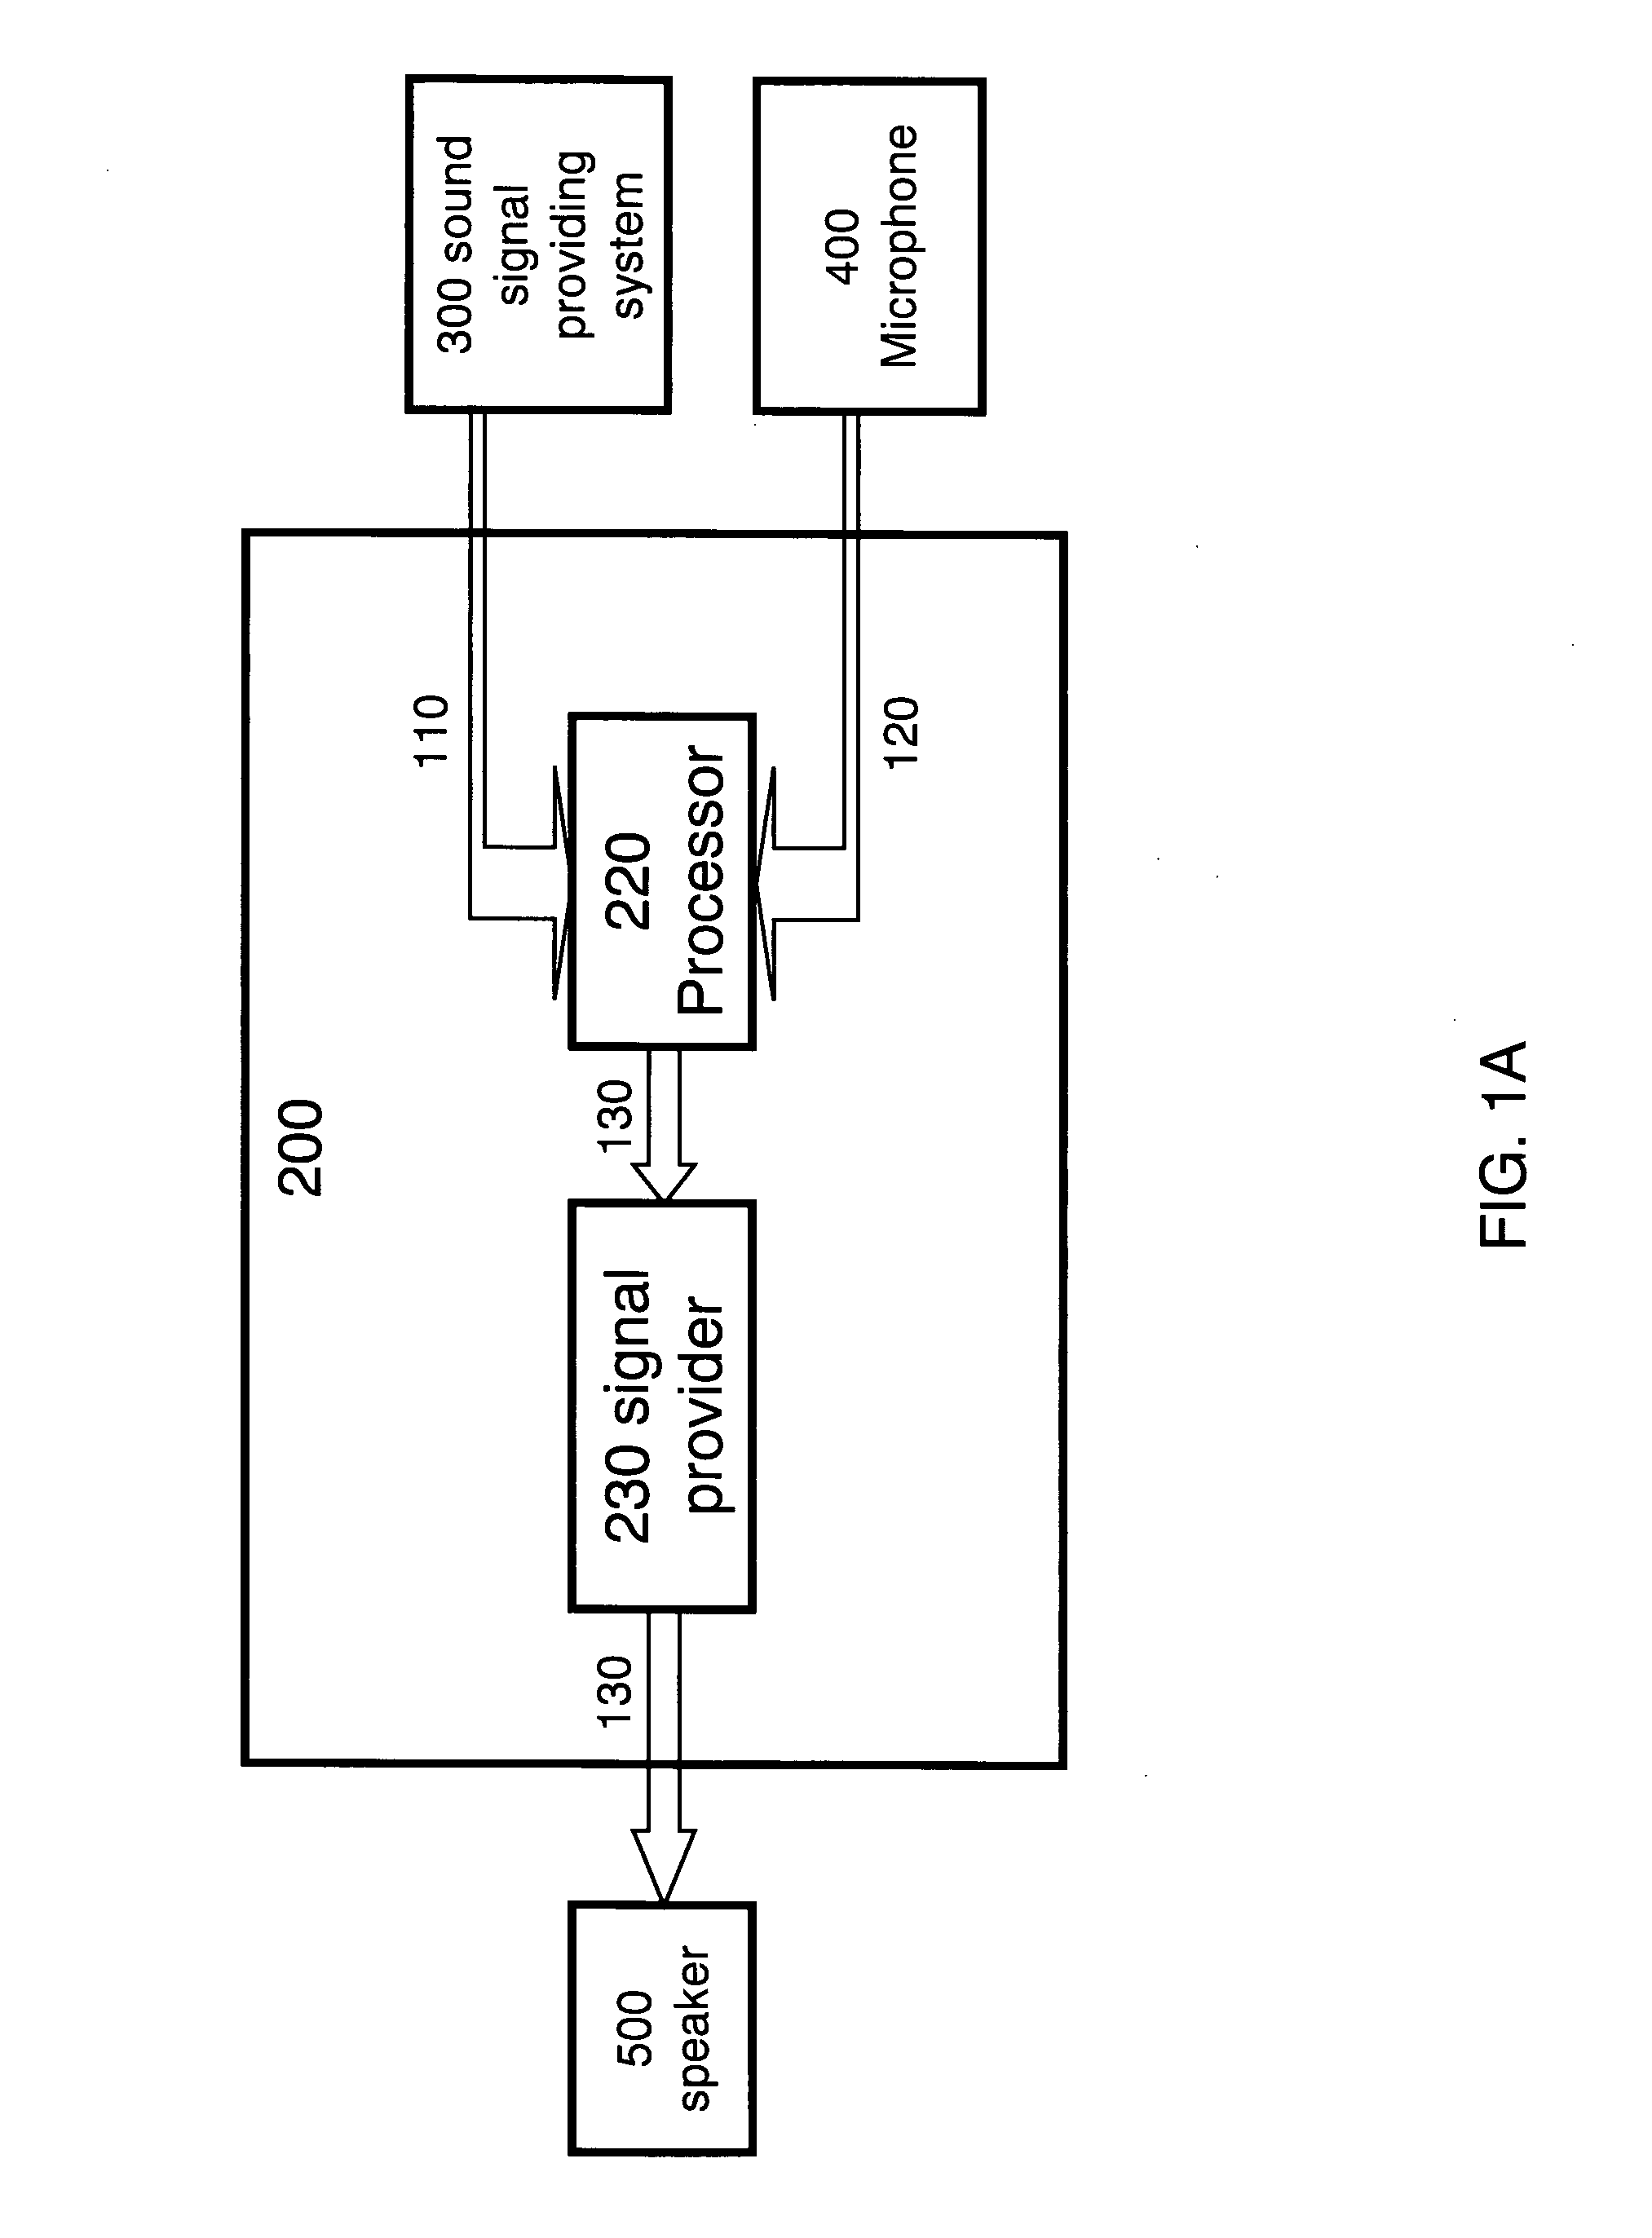 System and a method for providing sound signals